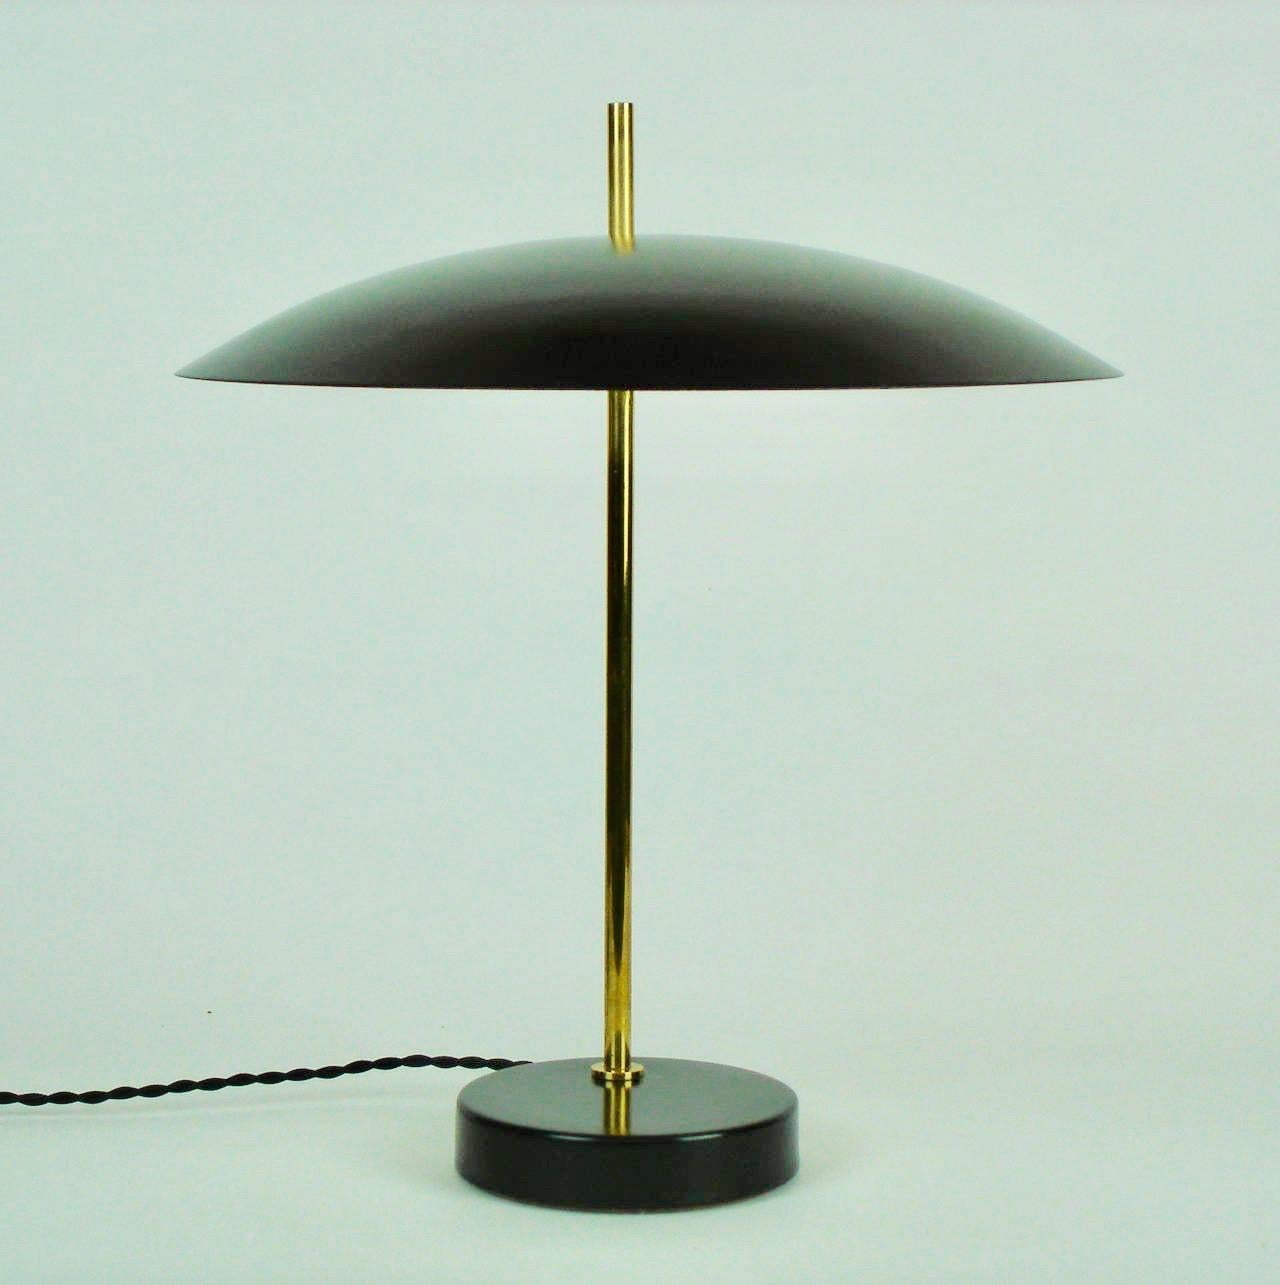 This lighting fixture was originally conceived as a desk lamp, with its' ideal height and even lighting to avoid eye fatigue. Its' elegant design and size made it an iconic object to place anywhere: In the bedroom, on furniture in the sitting room,